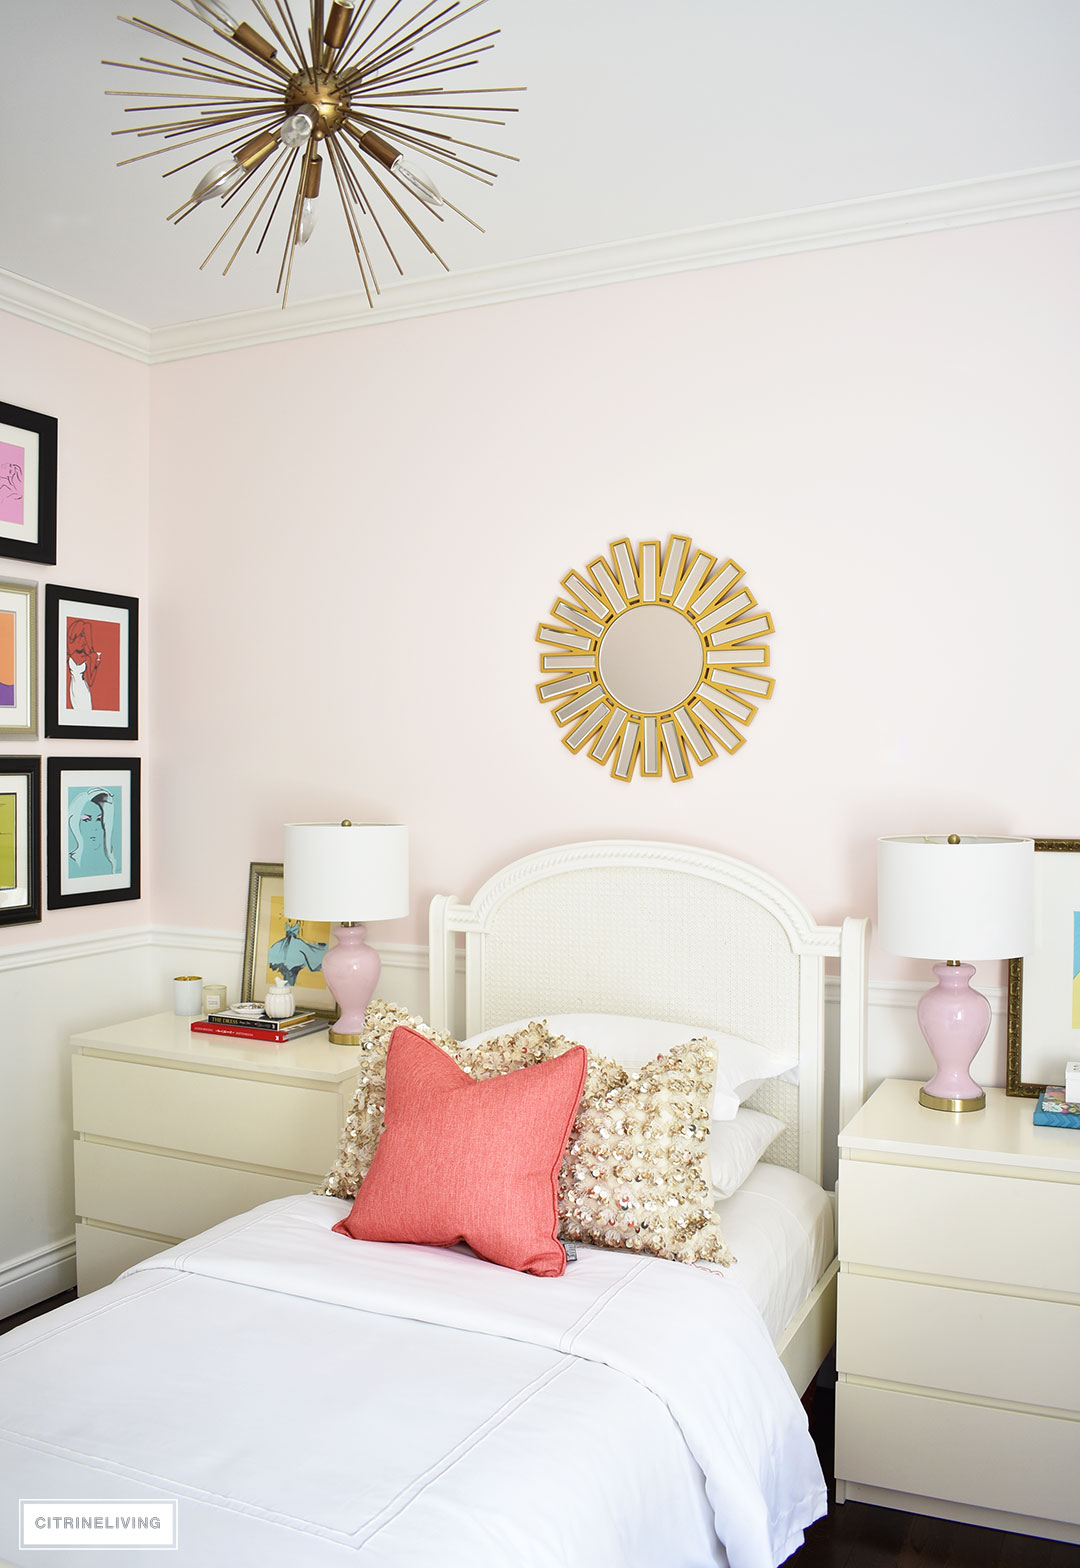 A chic, modern girl's bedroom featuring blush pink walls, coral and brass accessories and brass lighting, is a fun and sophisticated look!